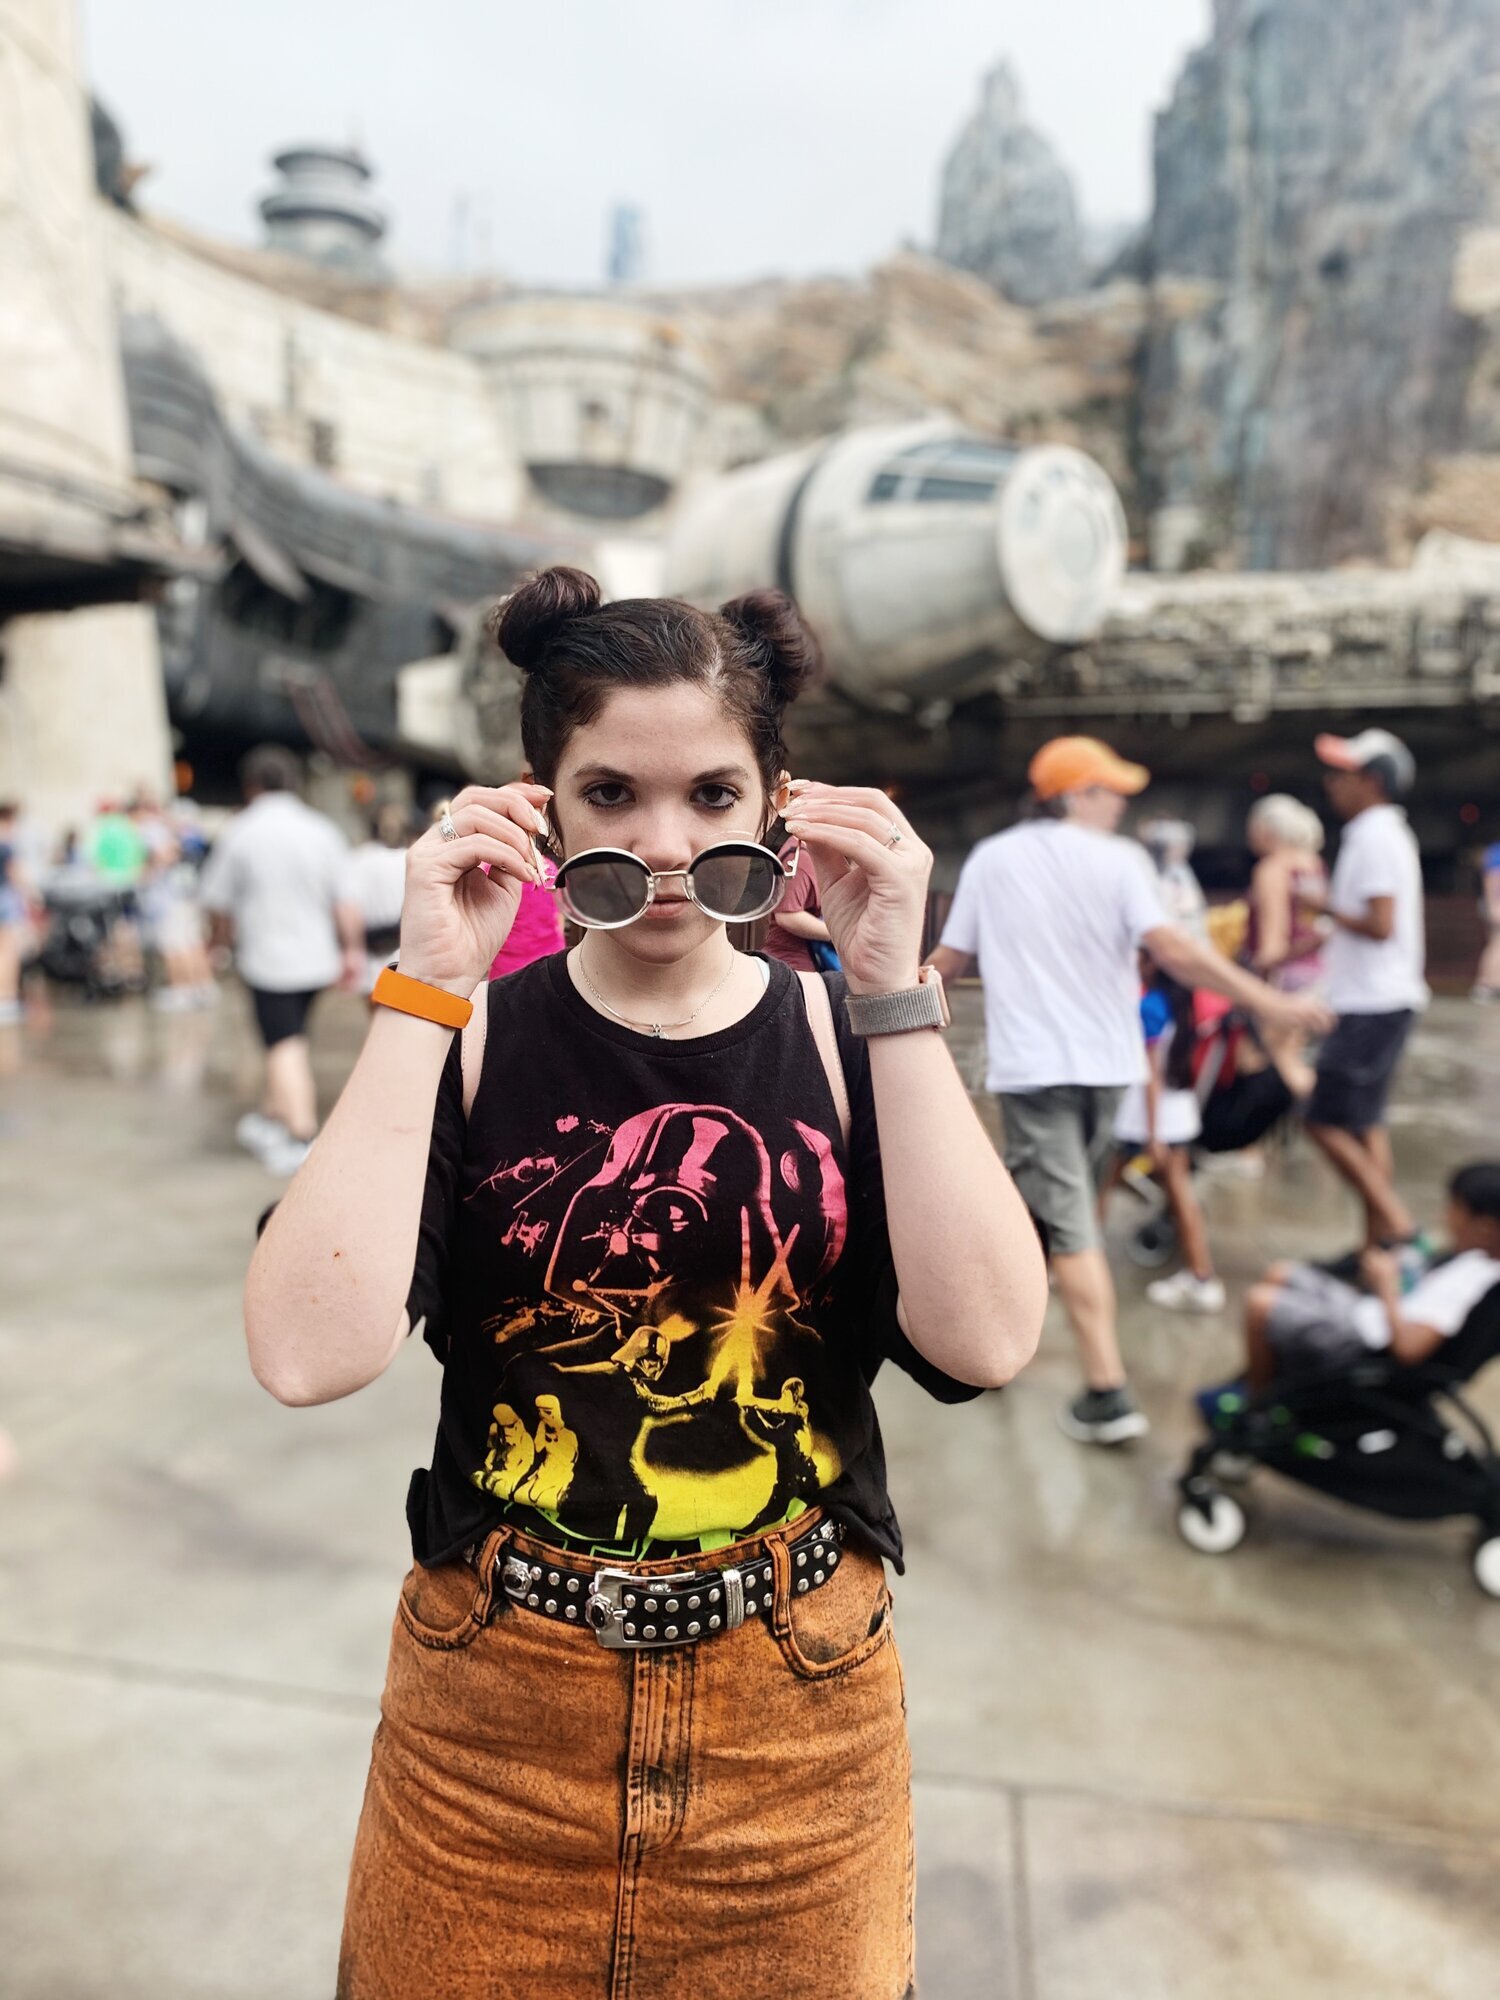 What to do at Star Wars: Galaxy's Edge at Disney World